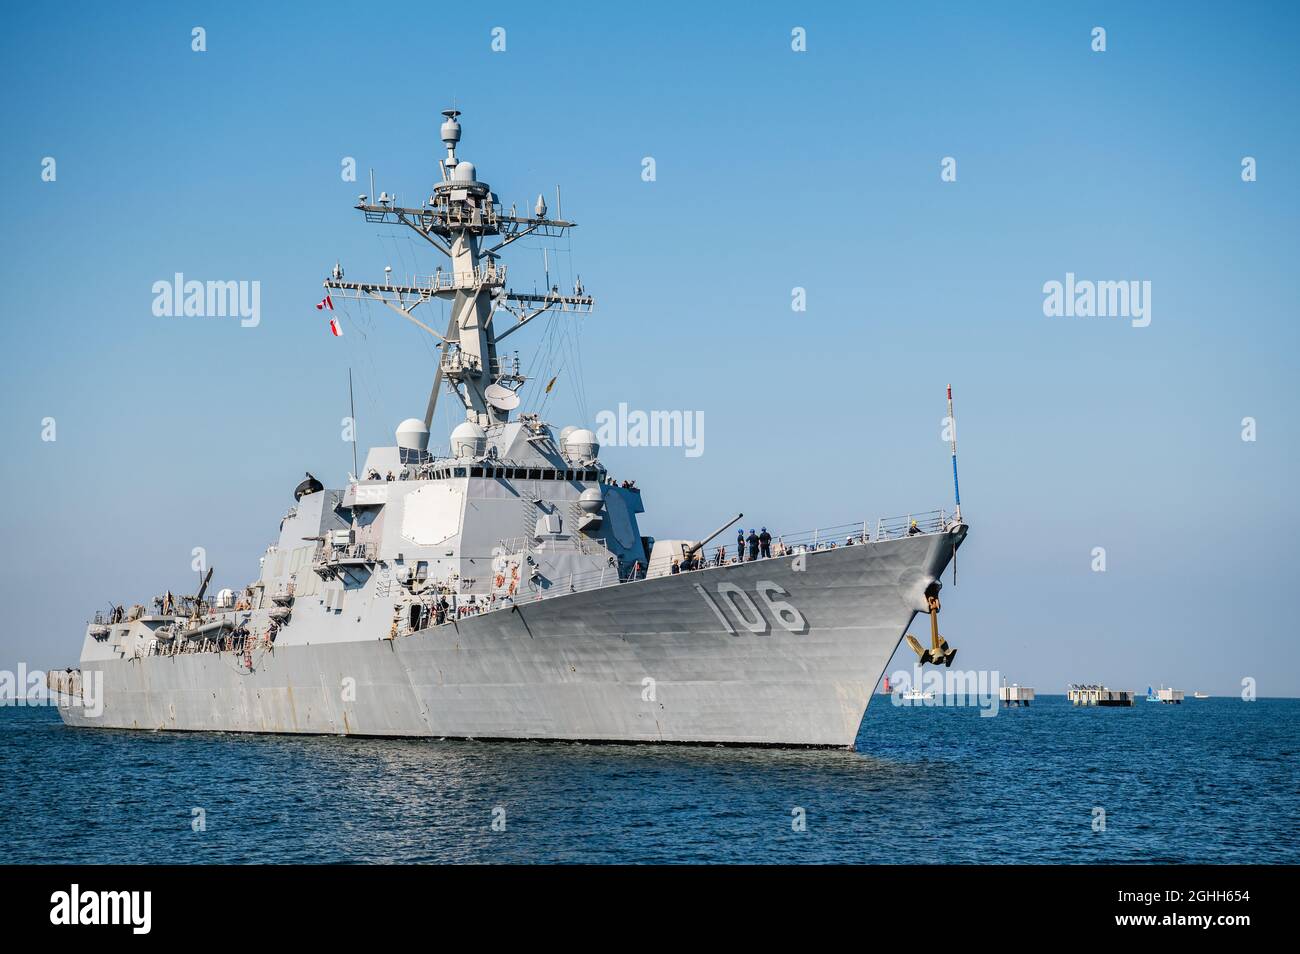 The U.S. Navy Arleigh Burke-Class guided-missile destroyer USS Stockdale arrives at Commander, Fleet Activities Yokosuka for a scheduled port visit August 28, 2021 in Yokosuka, Japan. Stock Photo